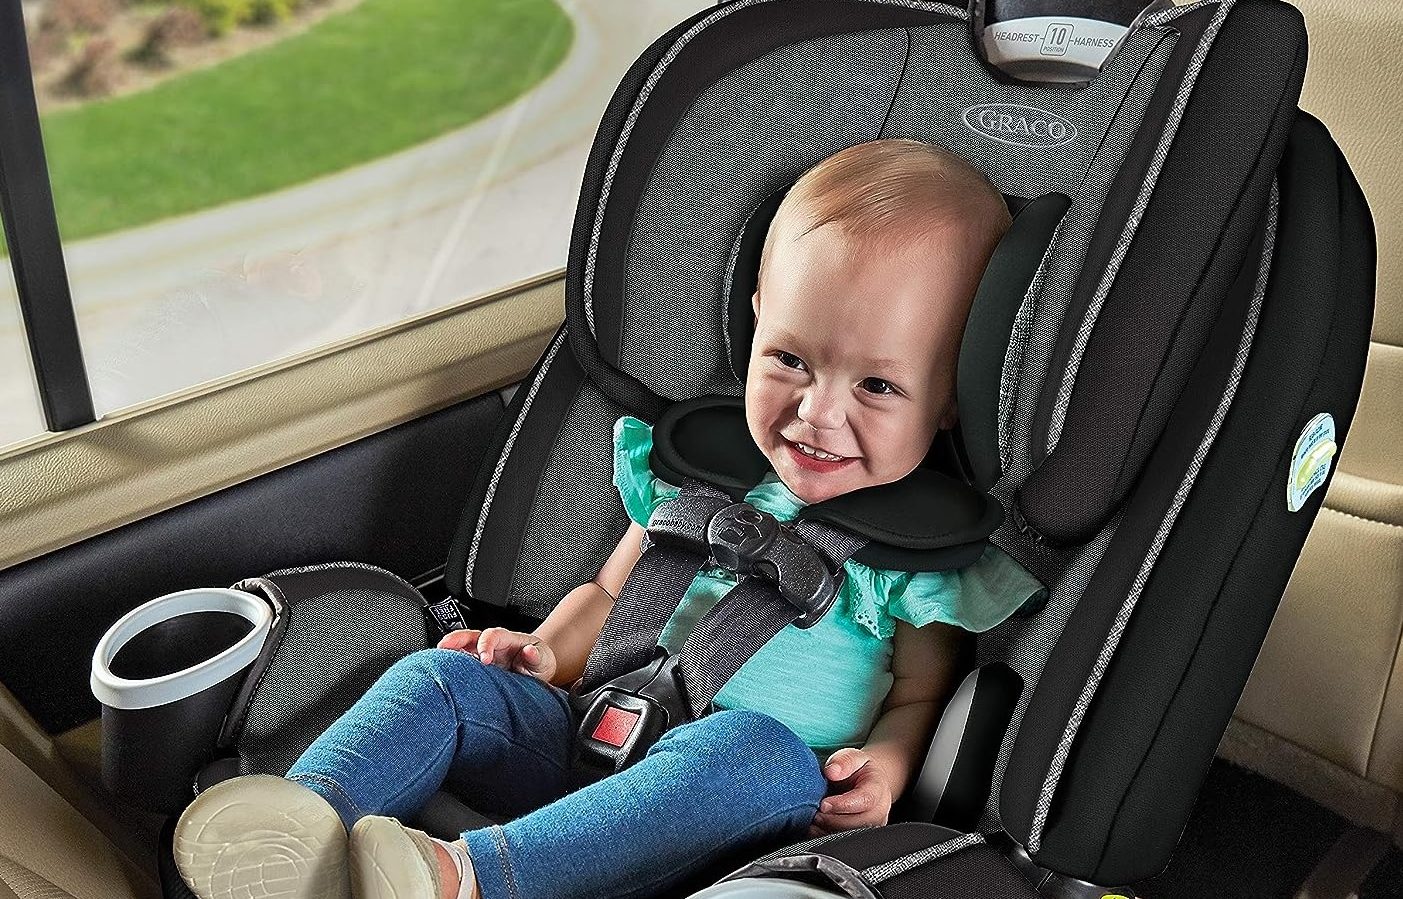 https://www.digitaltrends.com/wp-content/uploads/2023/11/Graco-4EVER-4-in-1-baby-car-seat-black-friday-deal-e1700605835244.jpg?fit=720%2C720&p=1